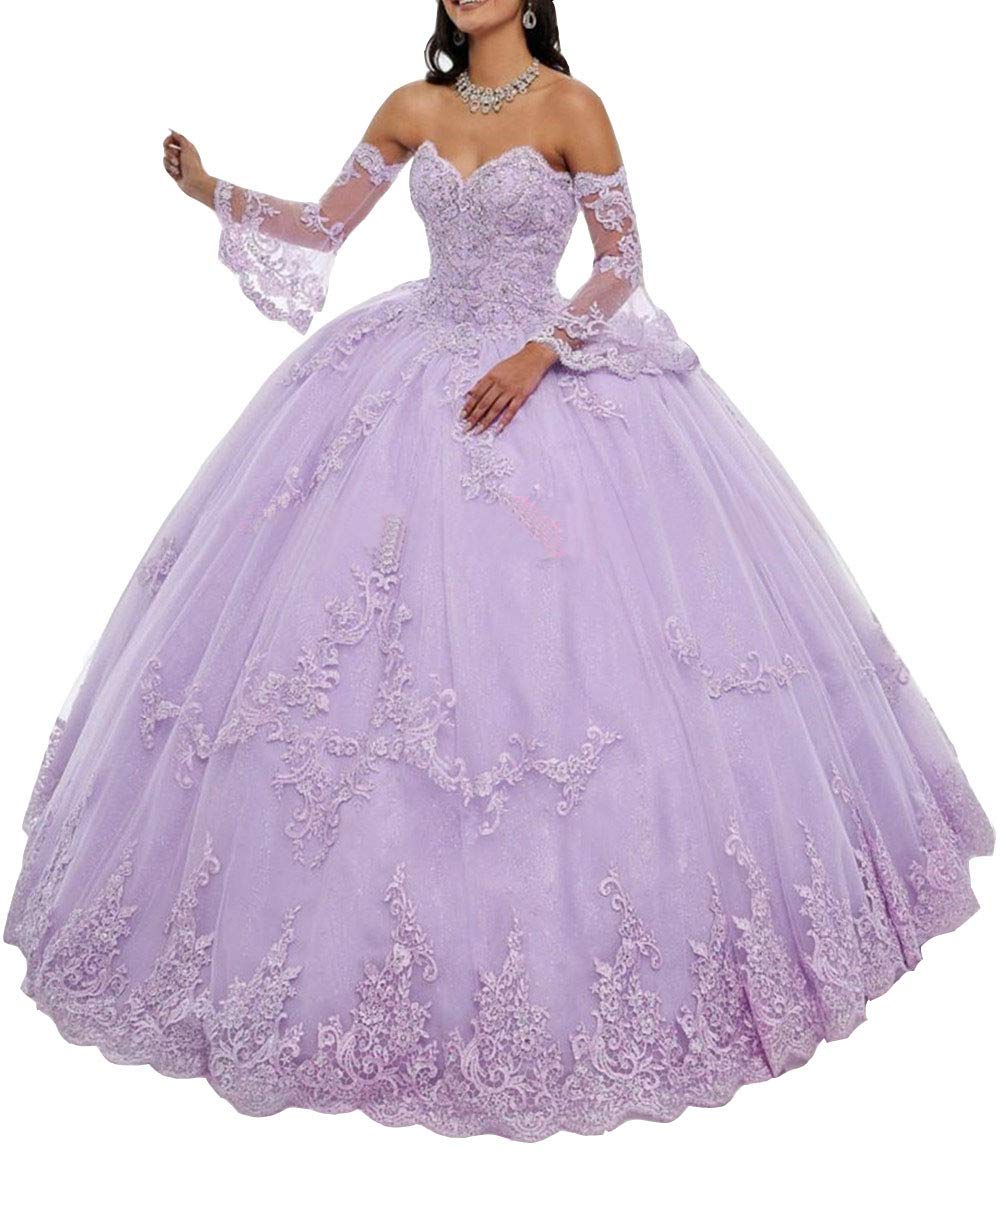 Yukale Women's Sweetheart Quinceanera Dresses Lace Appliques Ball Gown with Detachable Long Sleeve